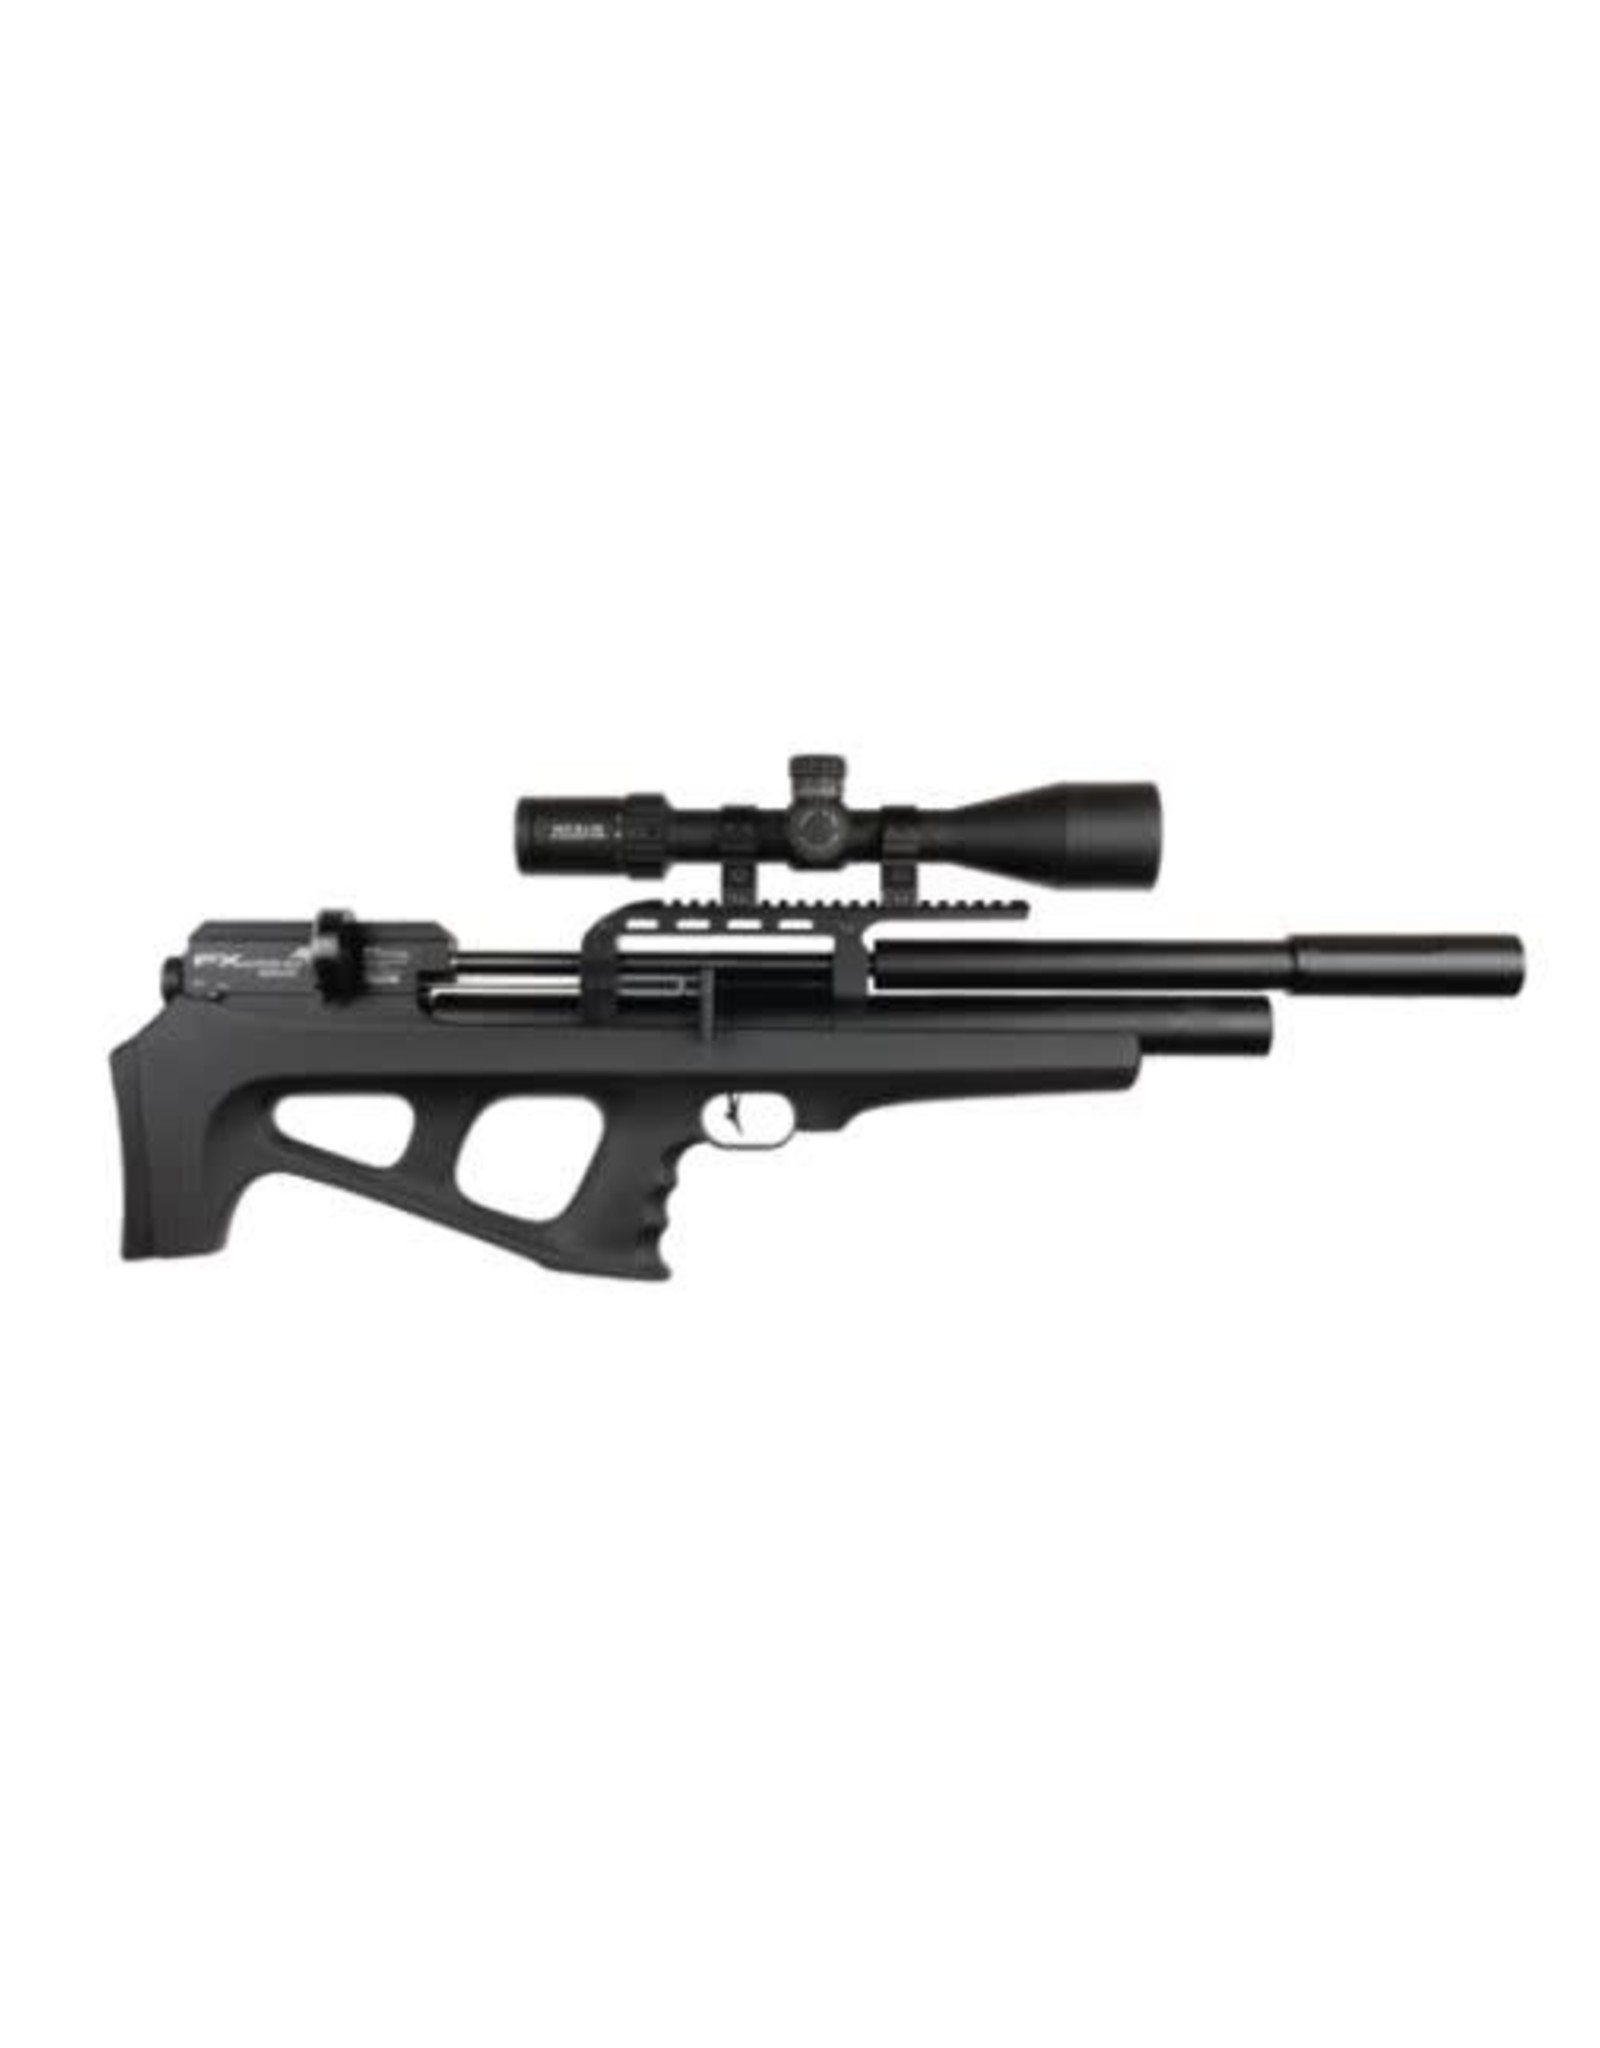 FX Airguns .30 Caliber Wildcat MKIII Compact with AMP Regulator and DonnyFL - 500mm Barrel - Synthetic Stock by FX